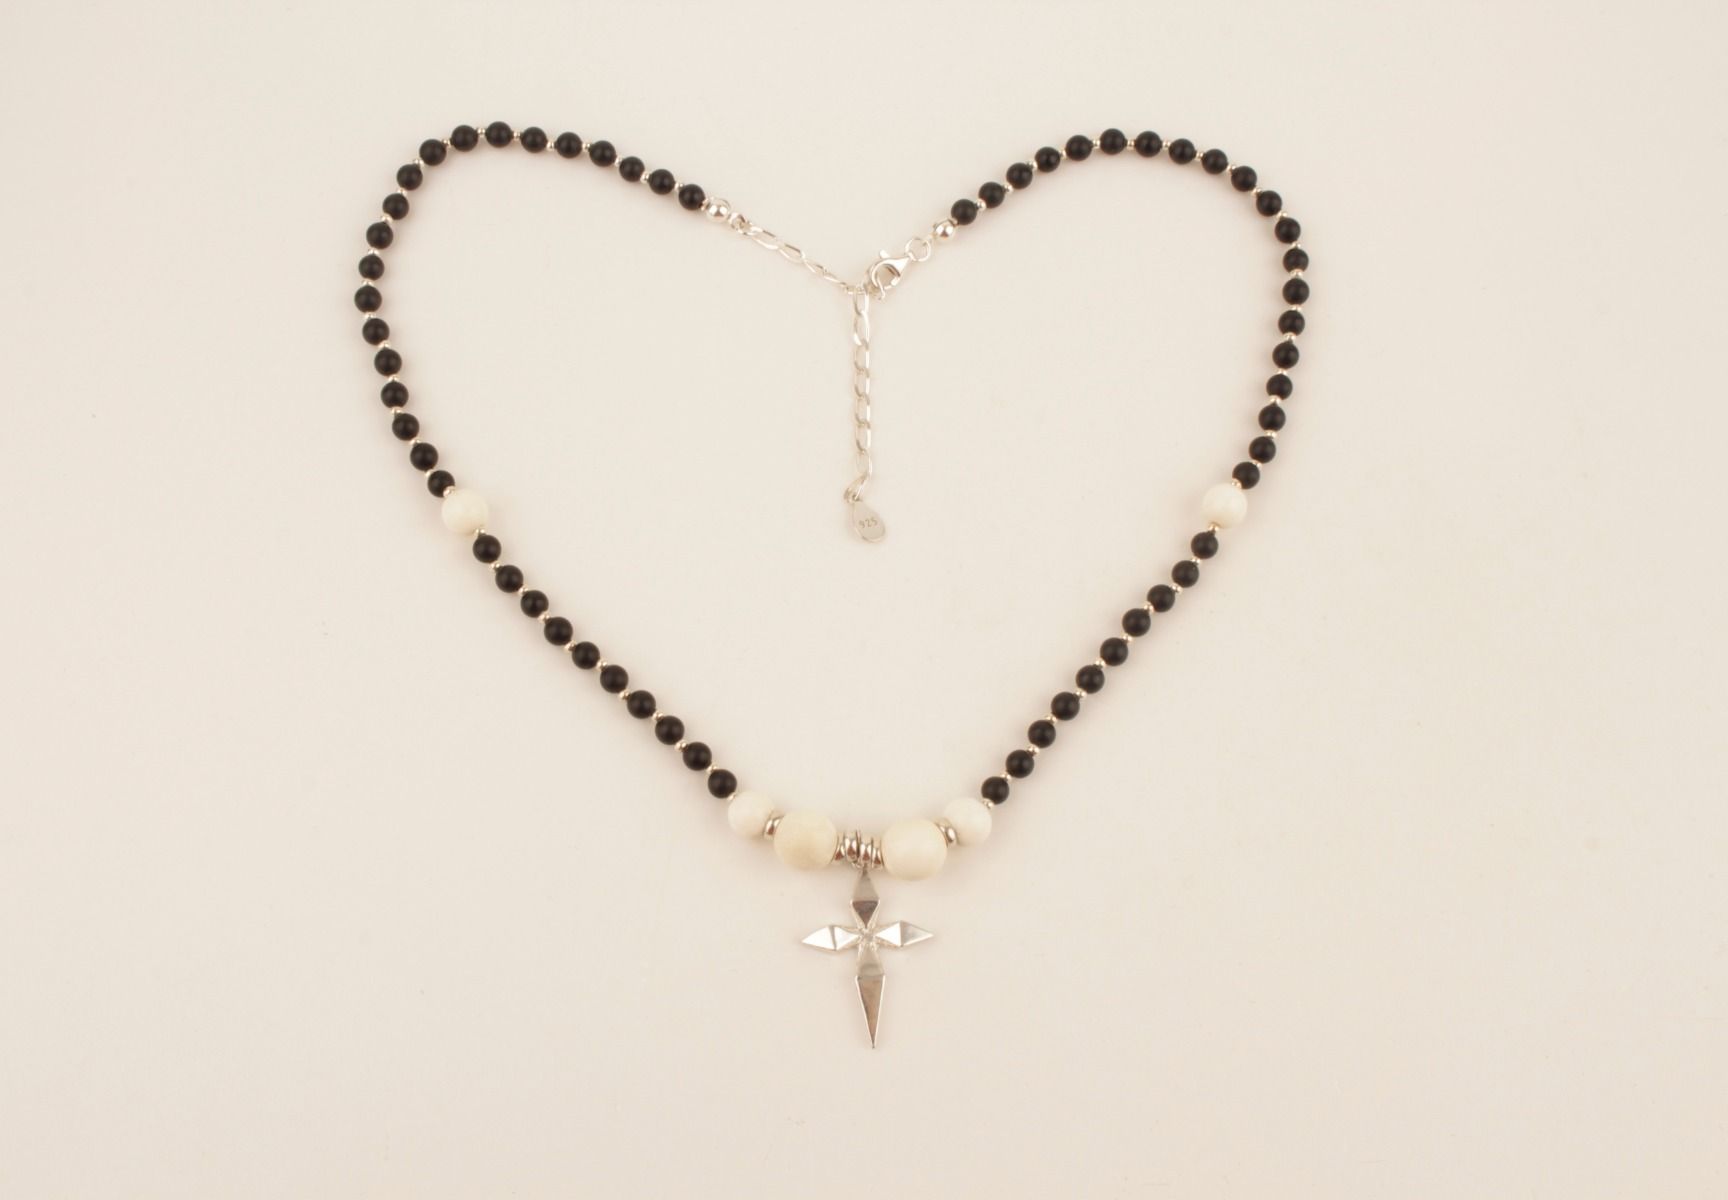 Mammoth Ivory & Black Agate Cross Necklace